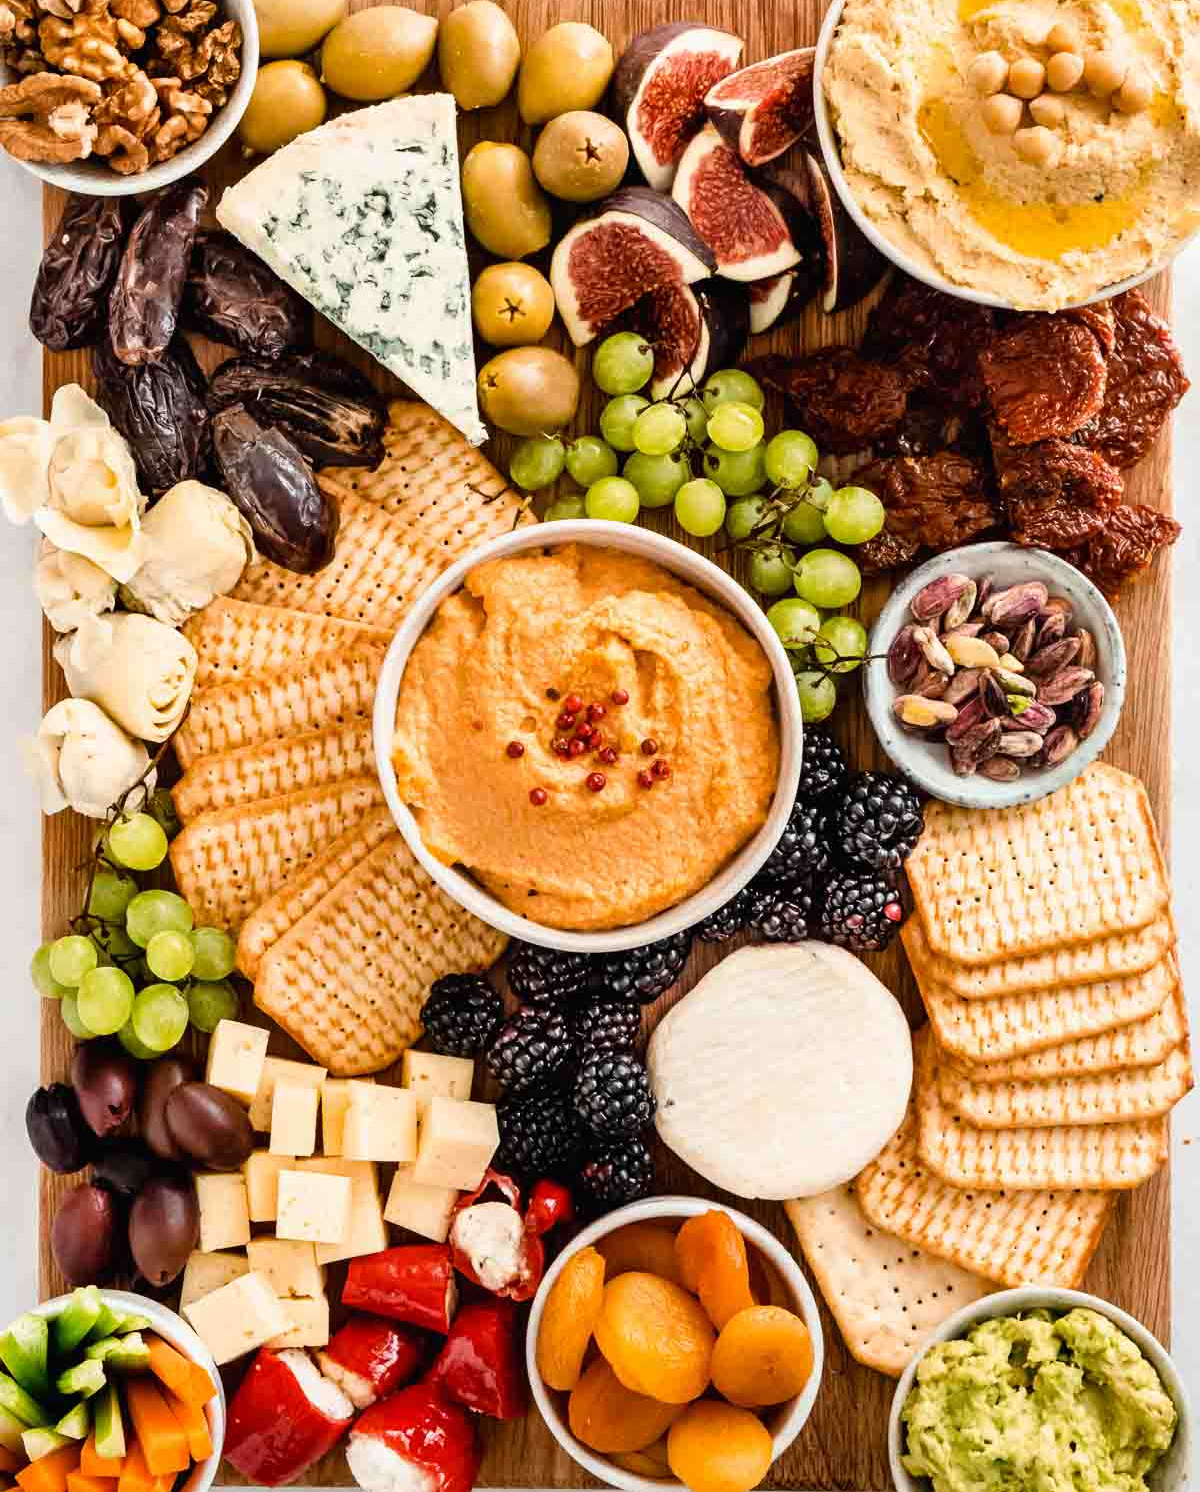 Vegan cheese, celery, olives, nuts, and crackers are displayed on Whole Soulfood Kitchen's Vegetarian board.